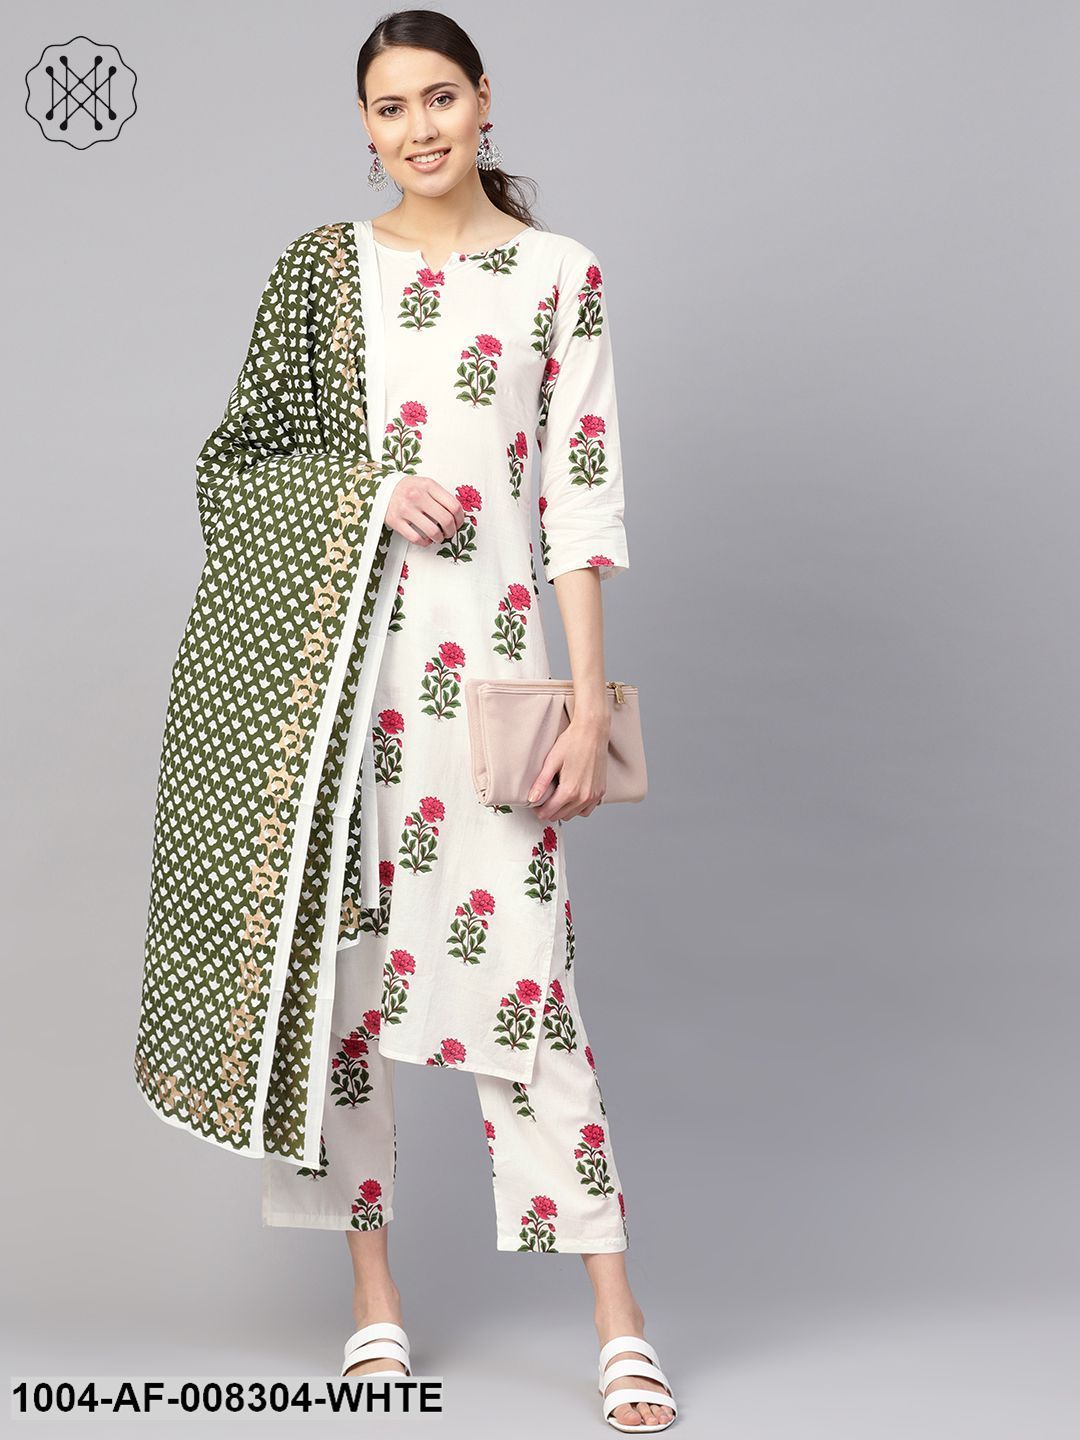 White Floral Printed Round Neck Straight Kurta With Pants And Green Gold Printed Dupatta.